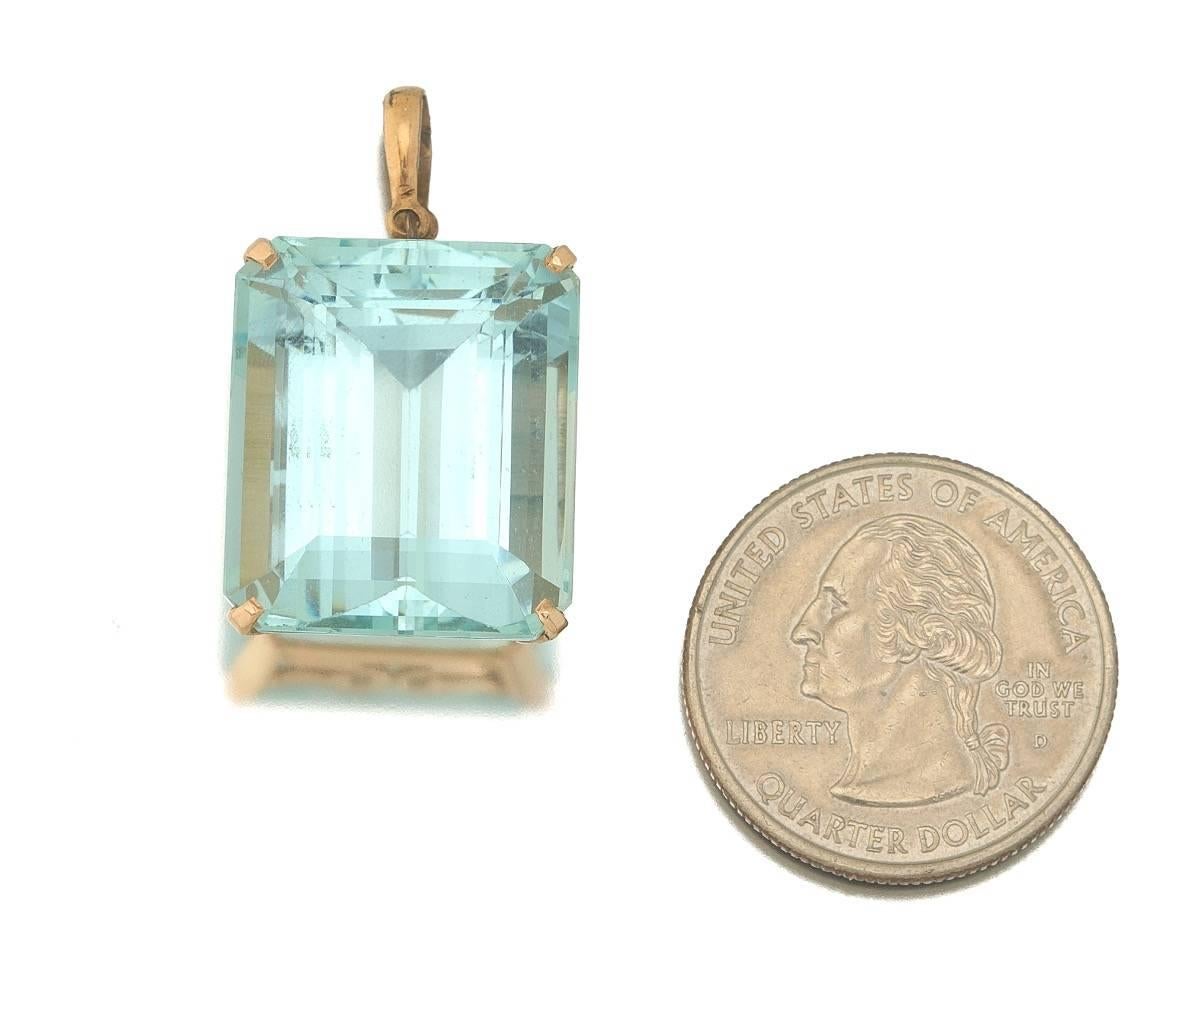 Stunning Art Deco period aquamarine pendant is quite rare in this 39 carat size given the exceptionally high quality, natural color and VS clarity condition.  The aquamarine is set in a simple 14k yellow frame but could easily be remade into a